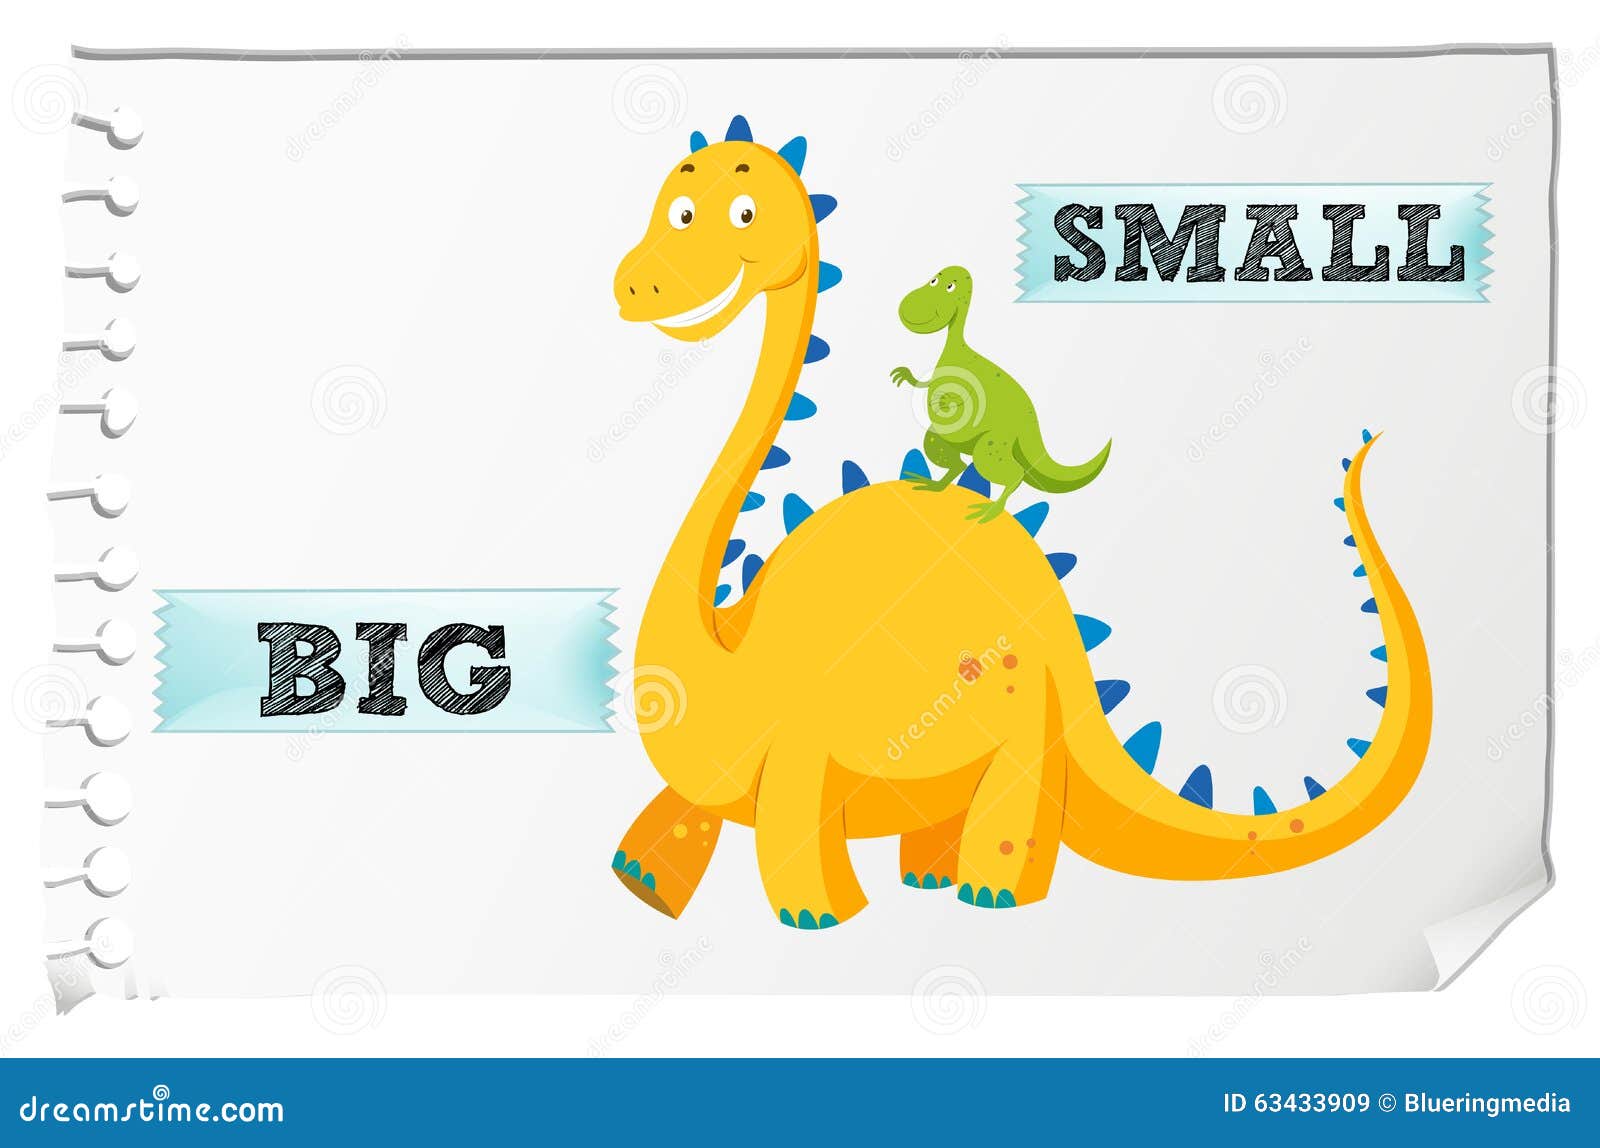 clipart of big and small - photo #14